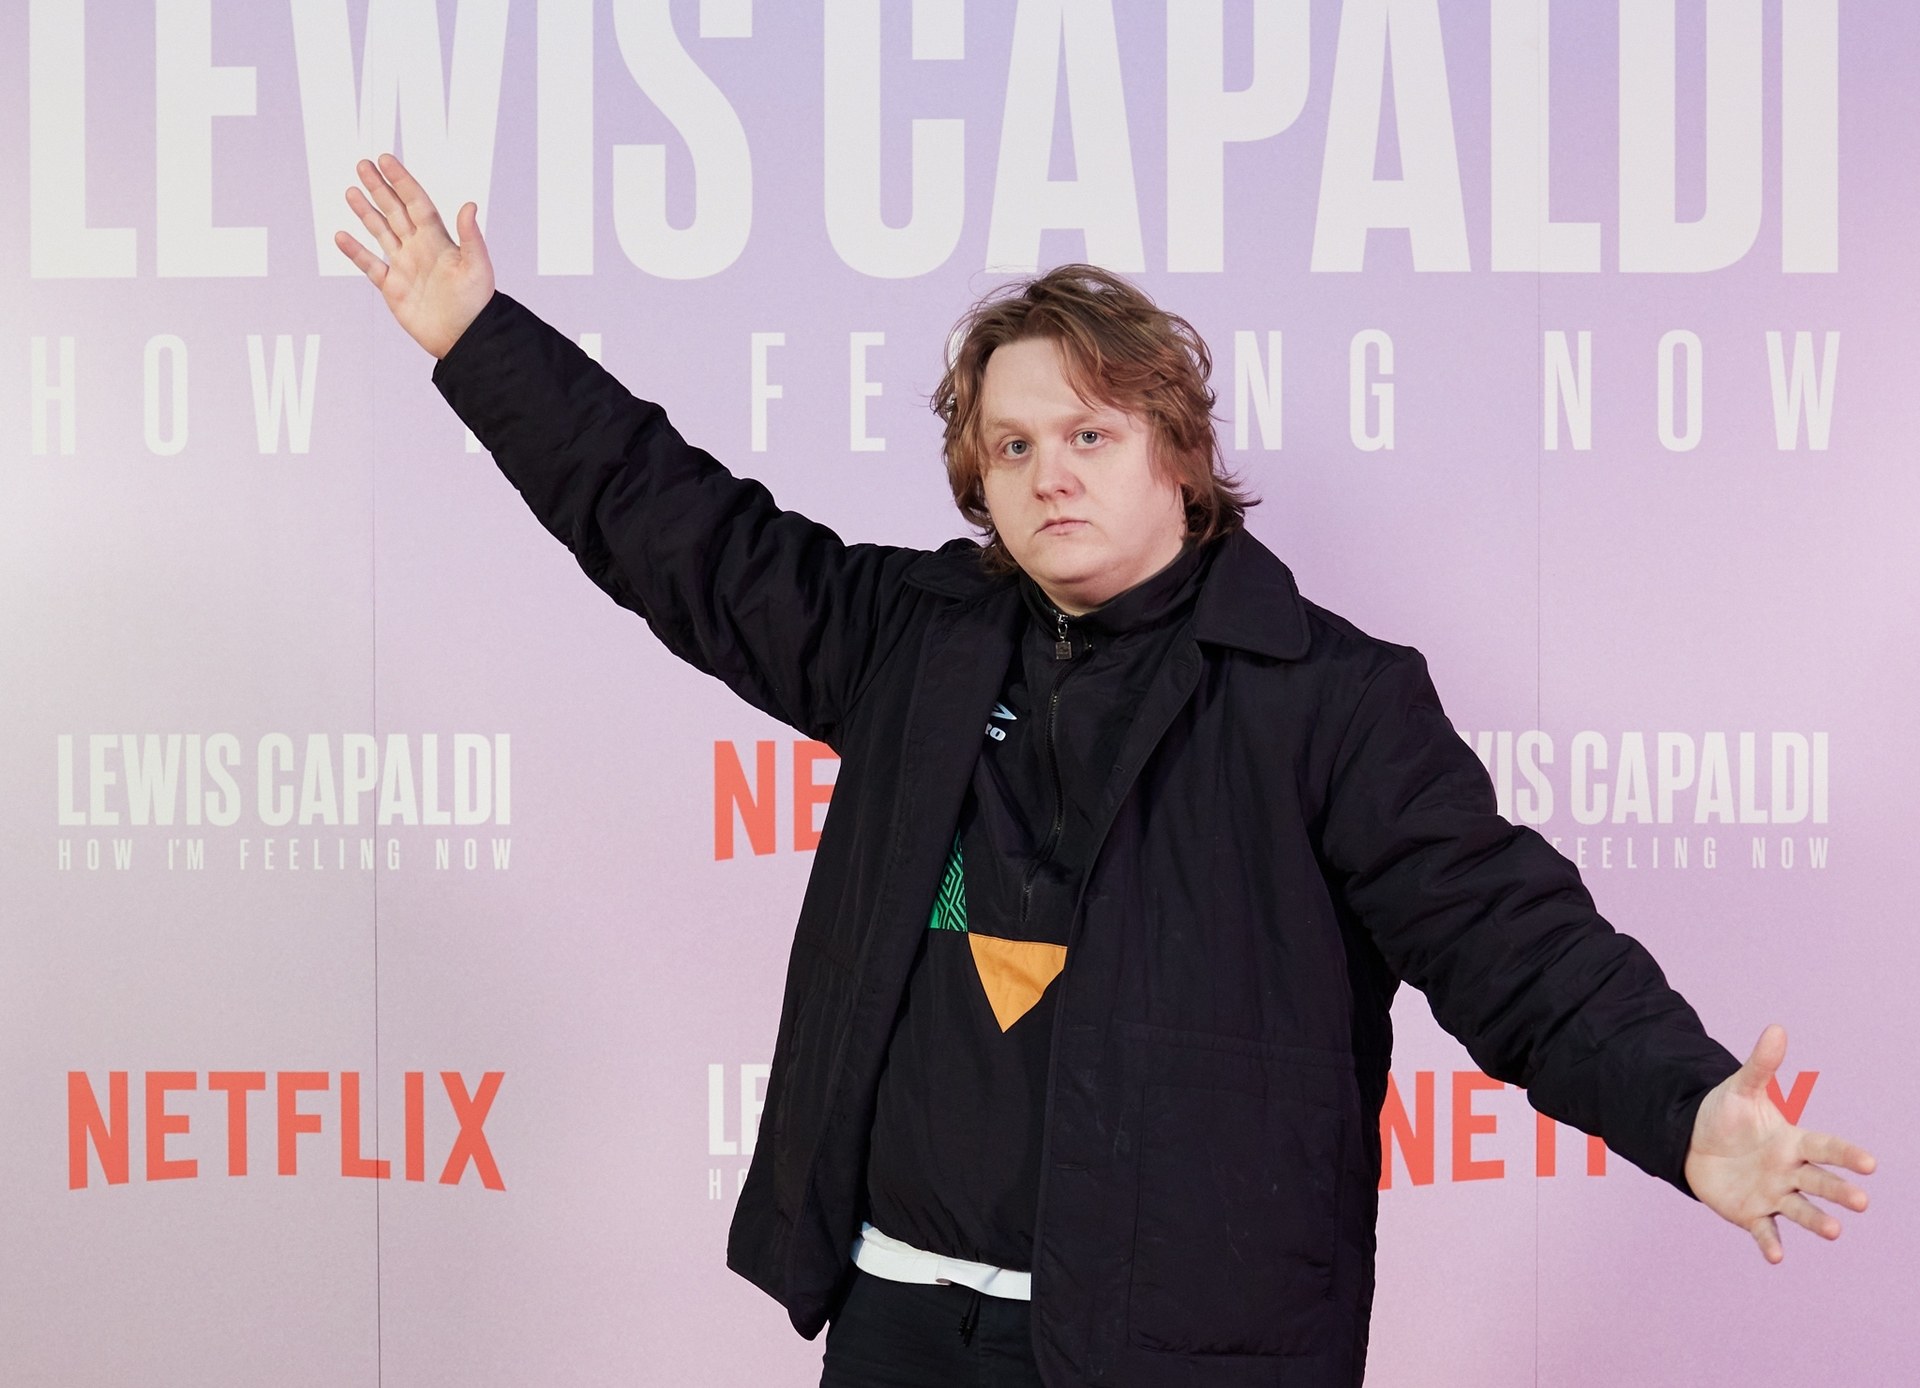 Lewis Capaldi: How I'm Feeling Now is out on Netflix on April 5. 